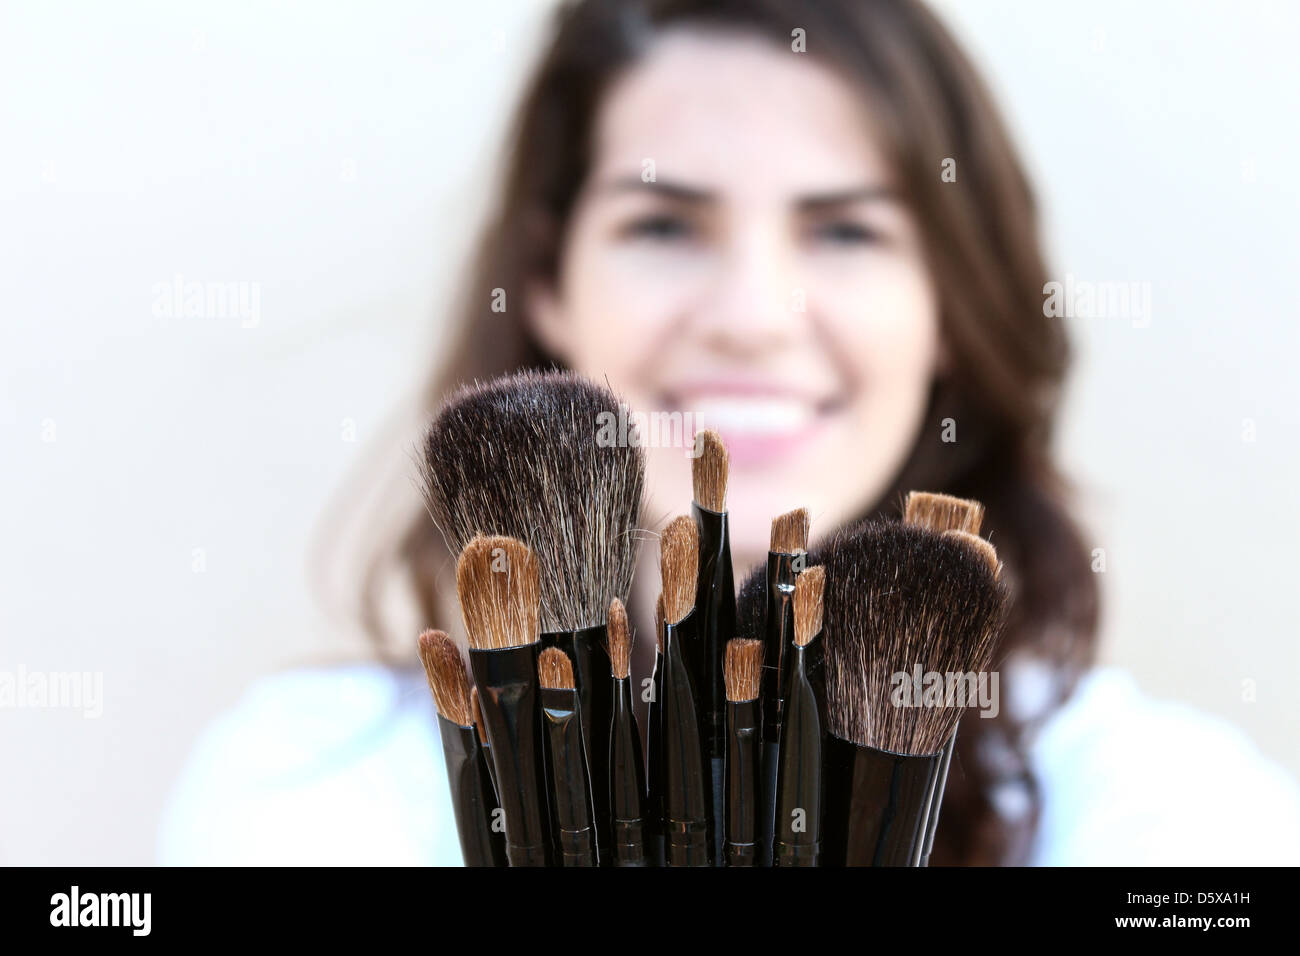 Happy young Woman showing a variety of makeup brushes Stock Photo